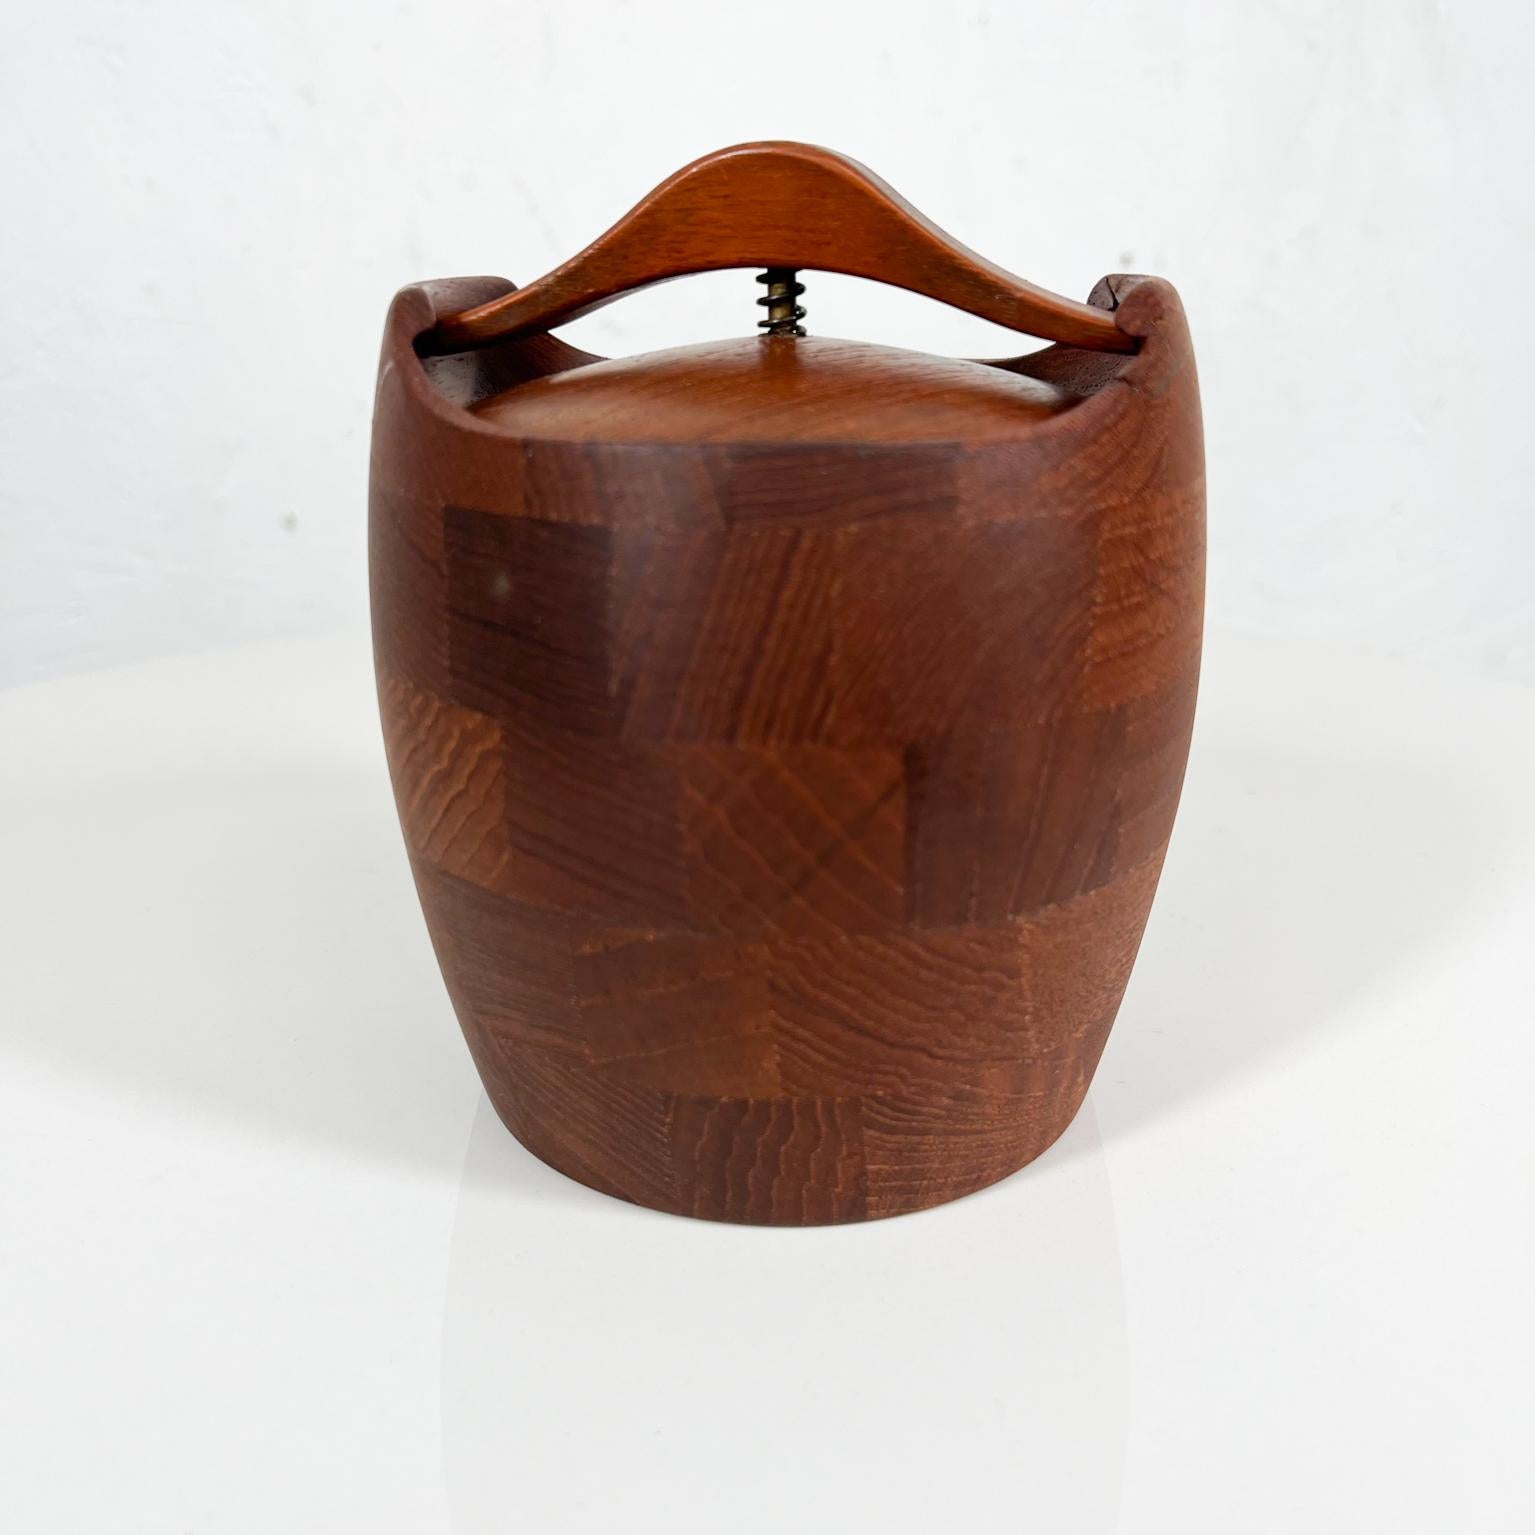 1950s ESA High quality tobacco humidor made of staved teak wood.
It provides a sufficiently humid microclimate.
Aesthetically pleasing design with a spring-loaded screw lid.
Ideal to store tobacco paraphernalia
Maker Stamped ESA